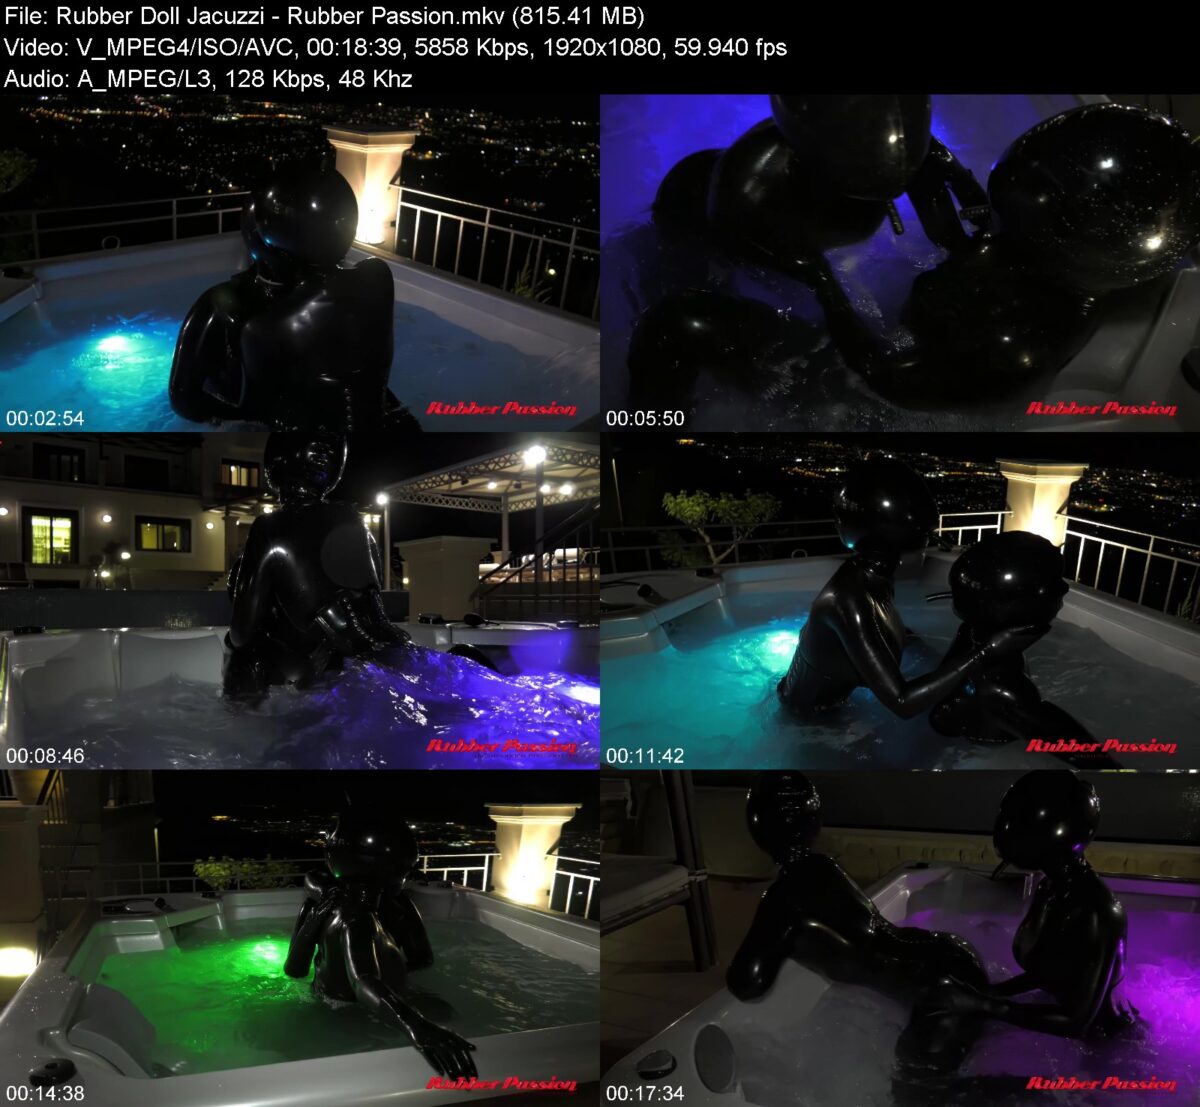 Rubber Doll Jacuzzi in Rubber Passion